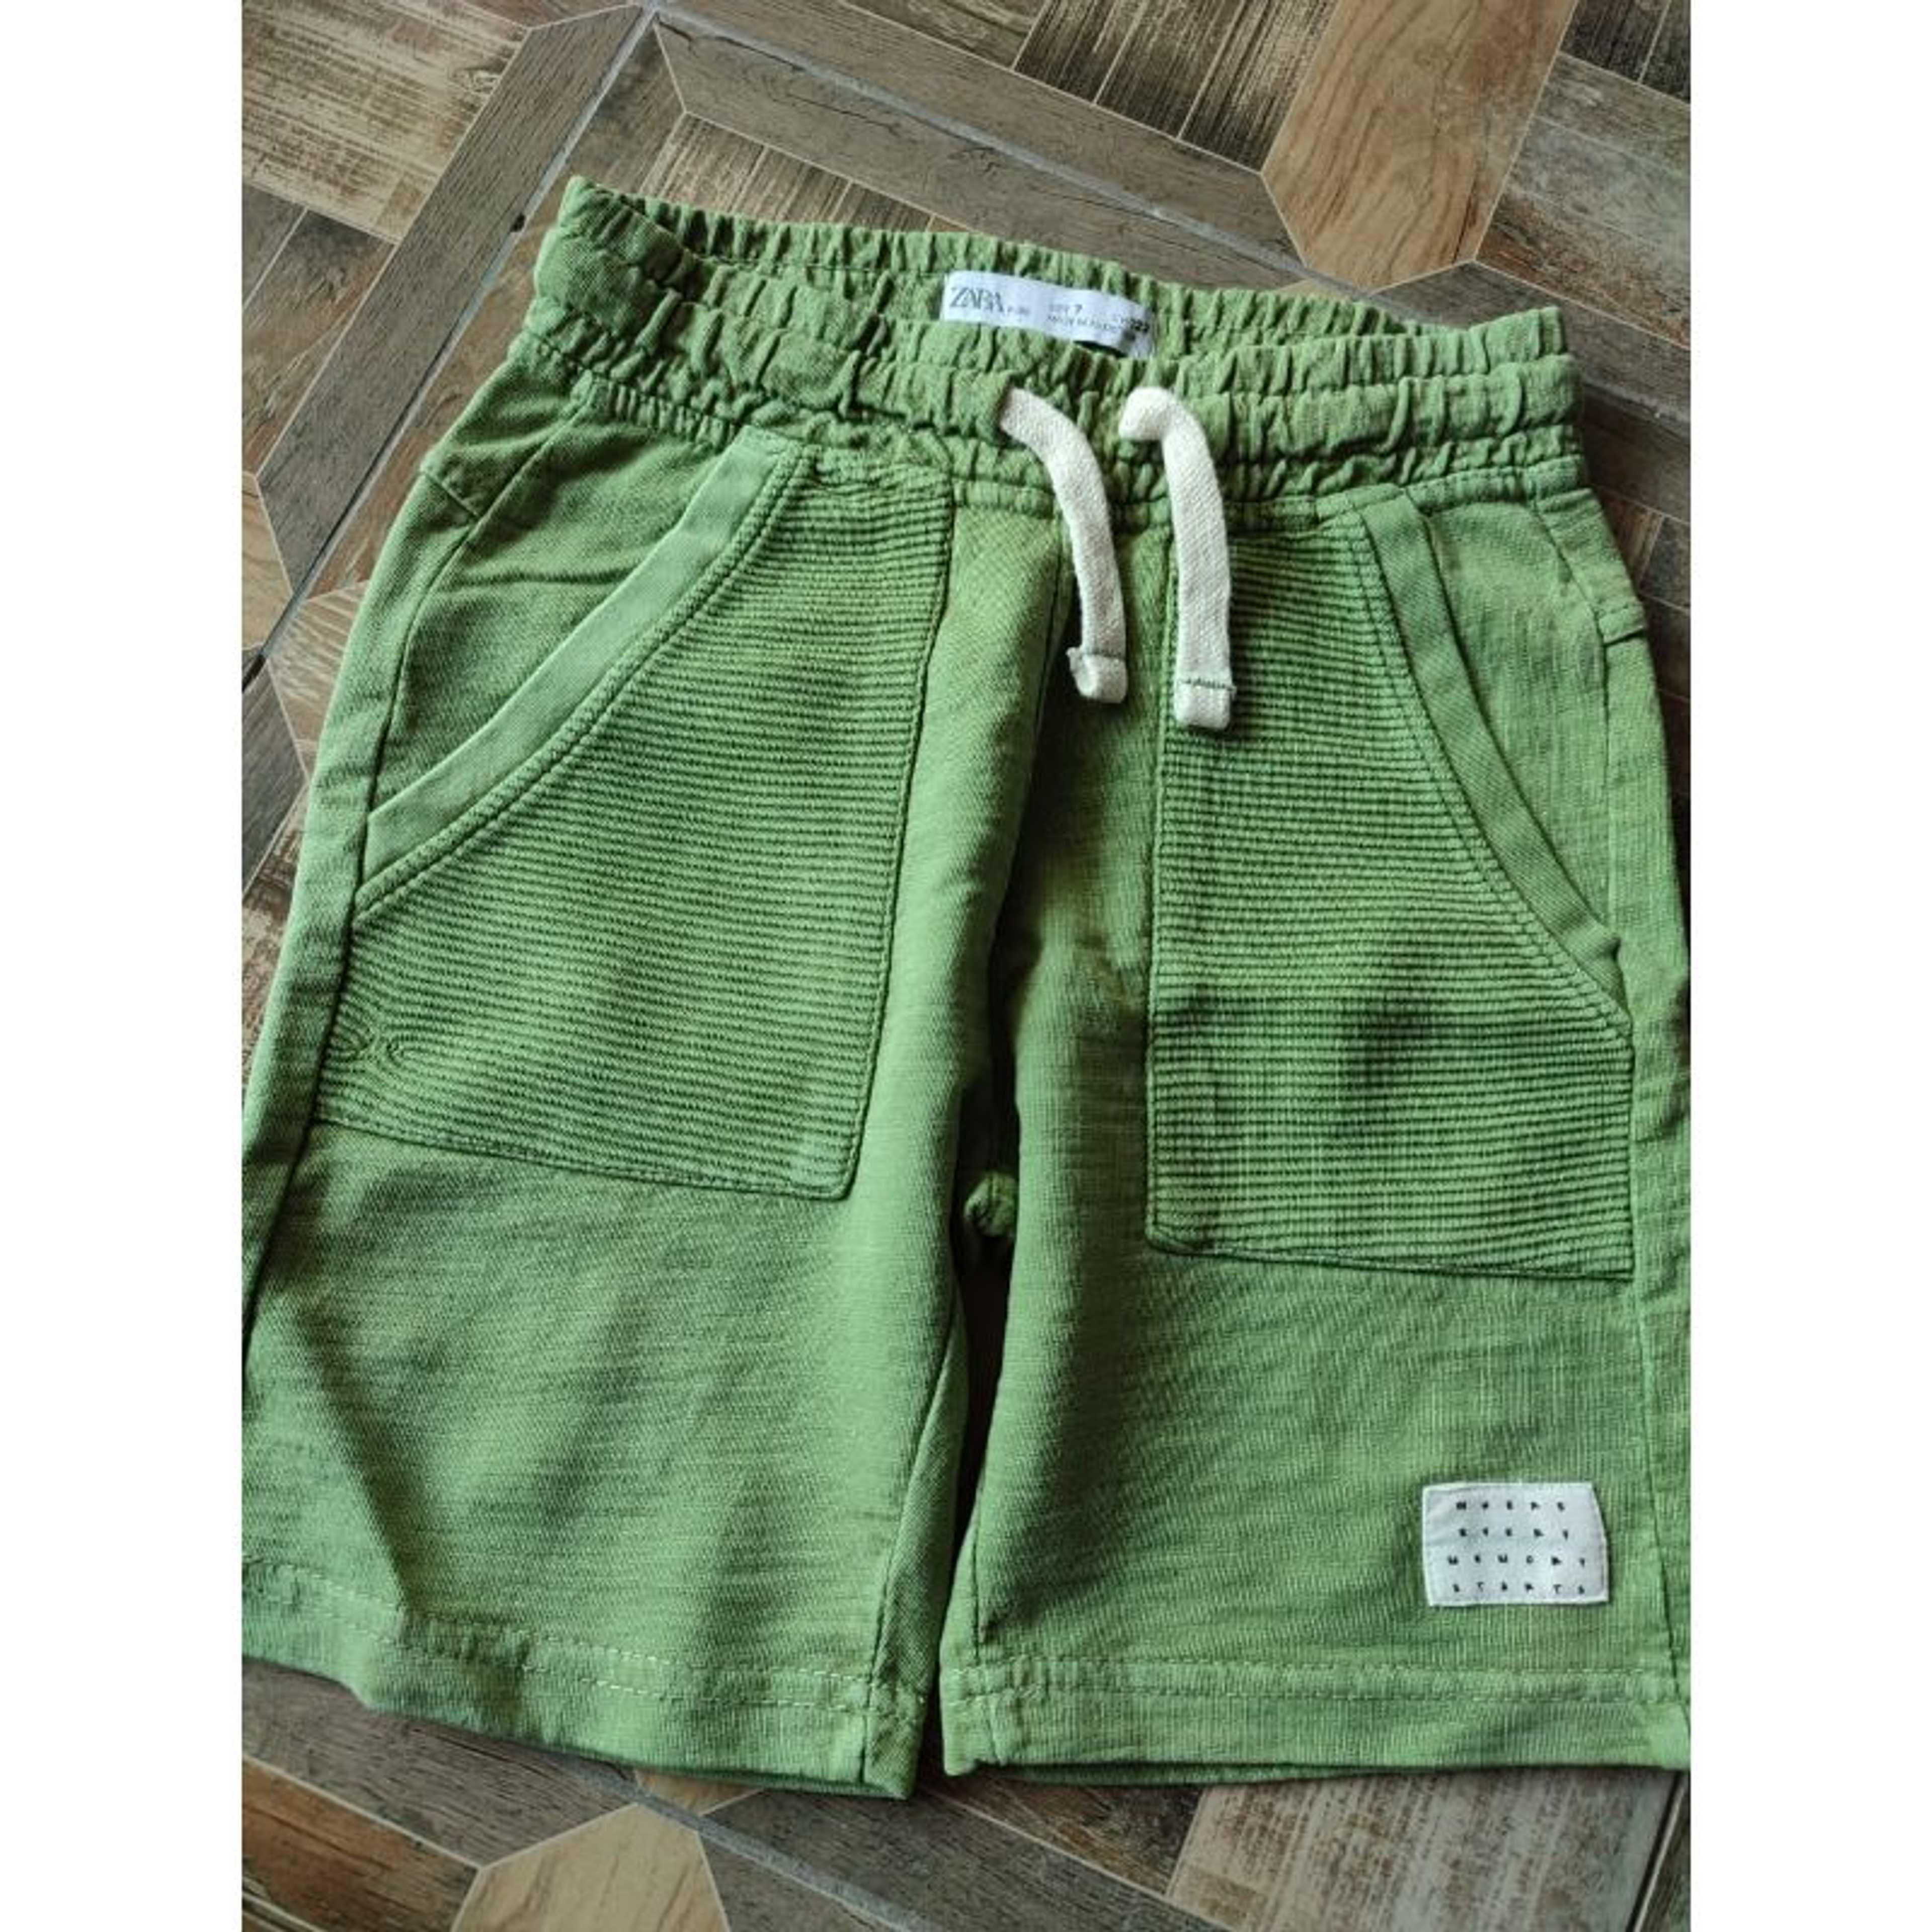 Boys shorts in green color